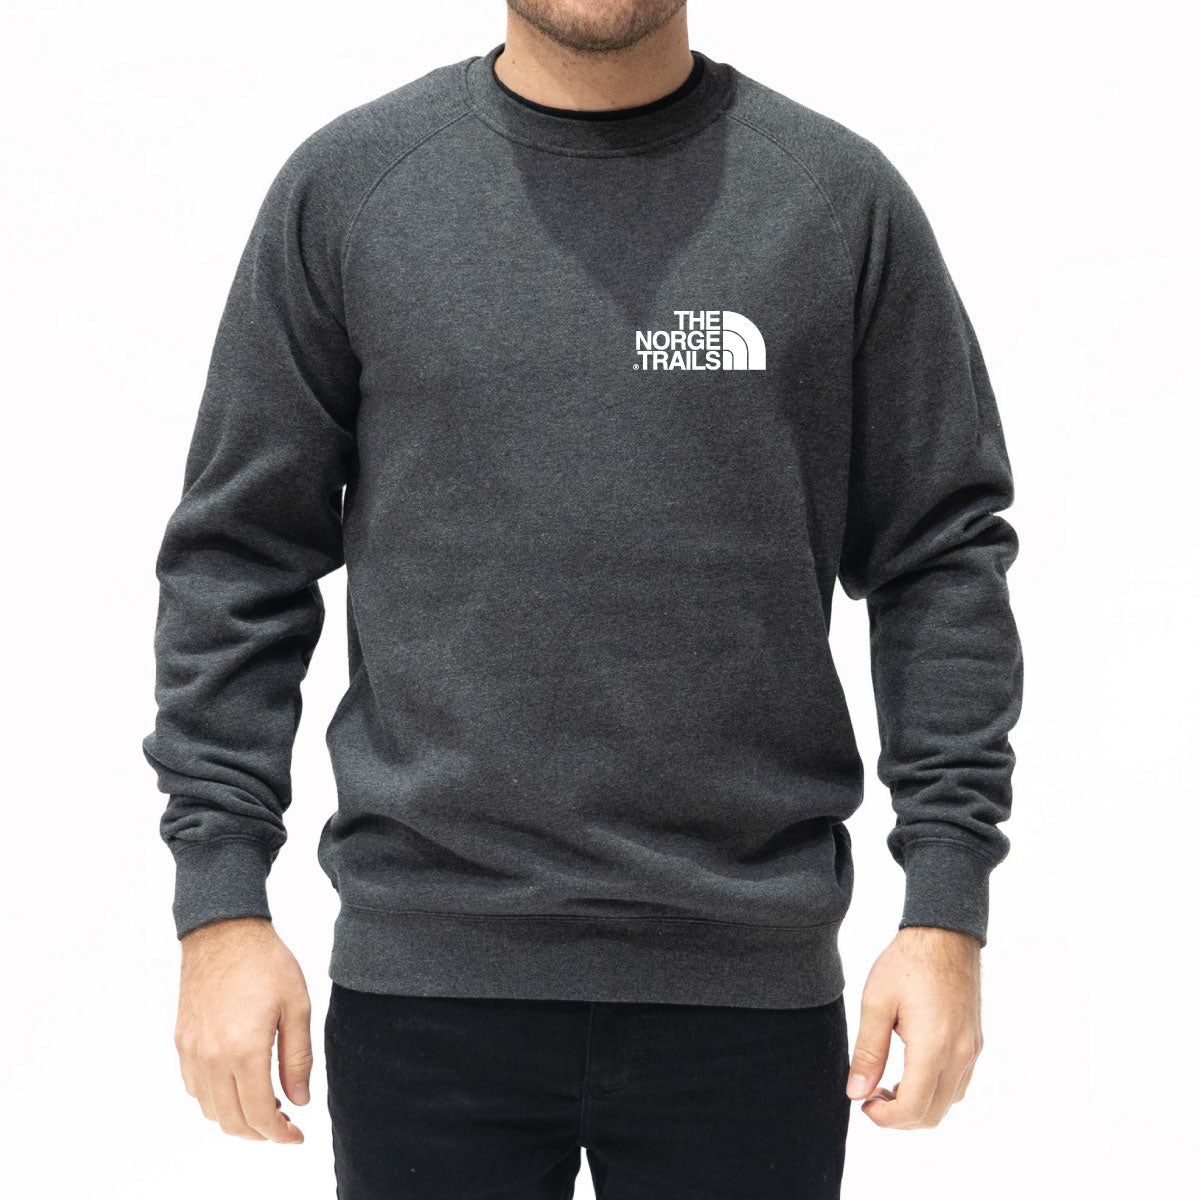 The Norge Trails Sweat Top